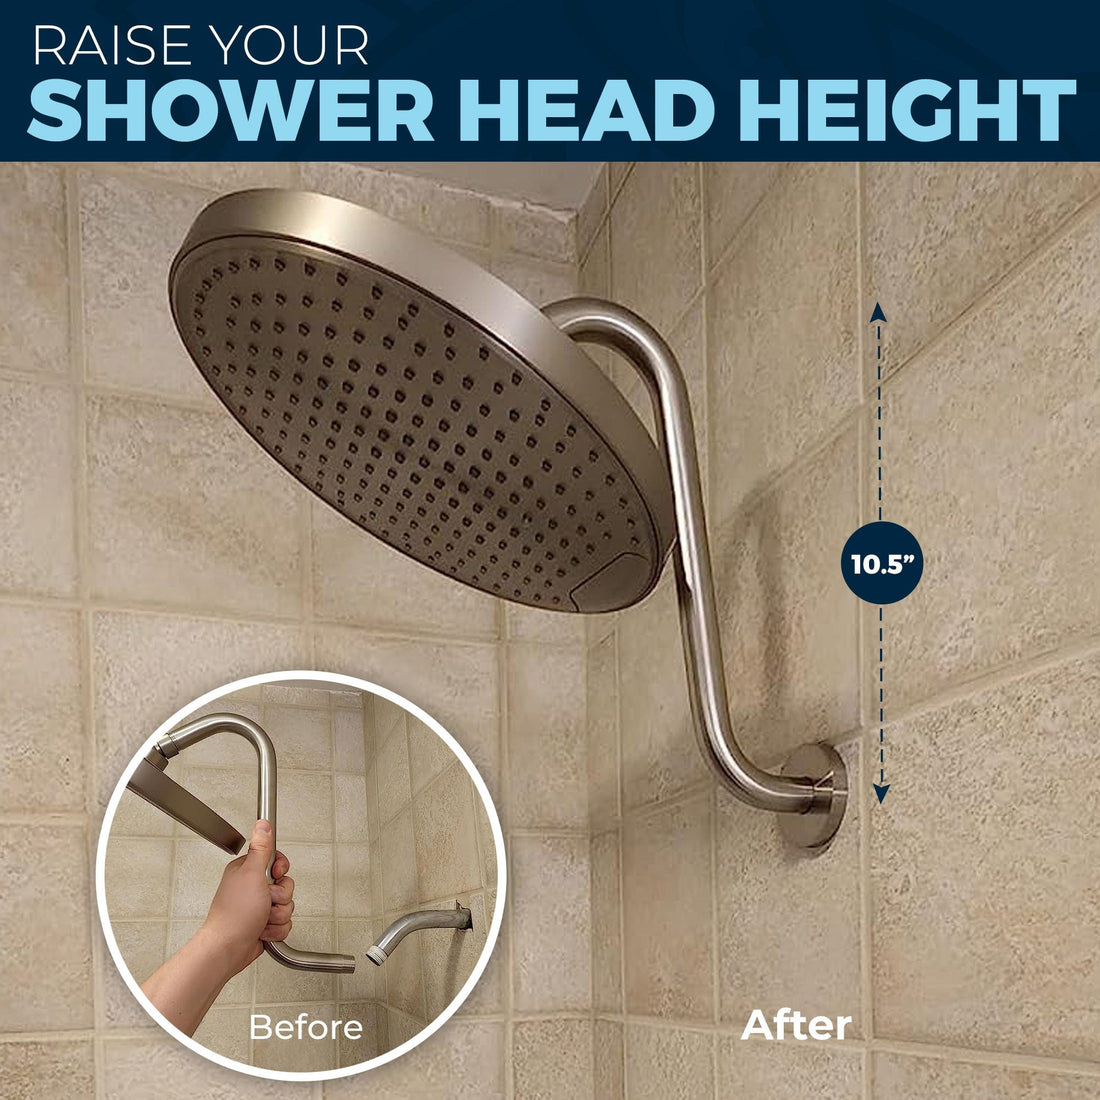 Before and After High Rise Shower Arm Raise Showerhead Height 10.5 Inches Shower Head Increase  Chrome - The Shower Head Store